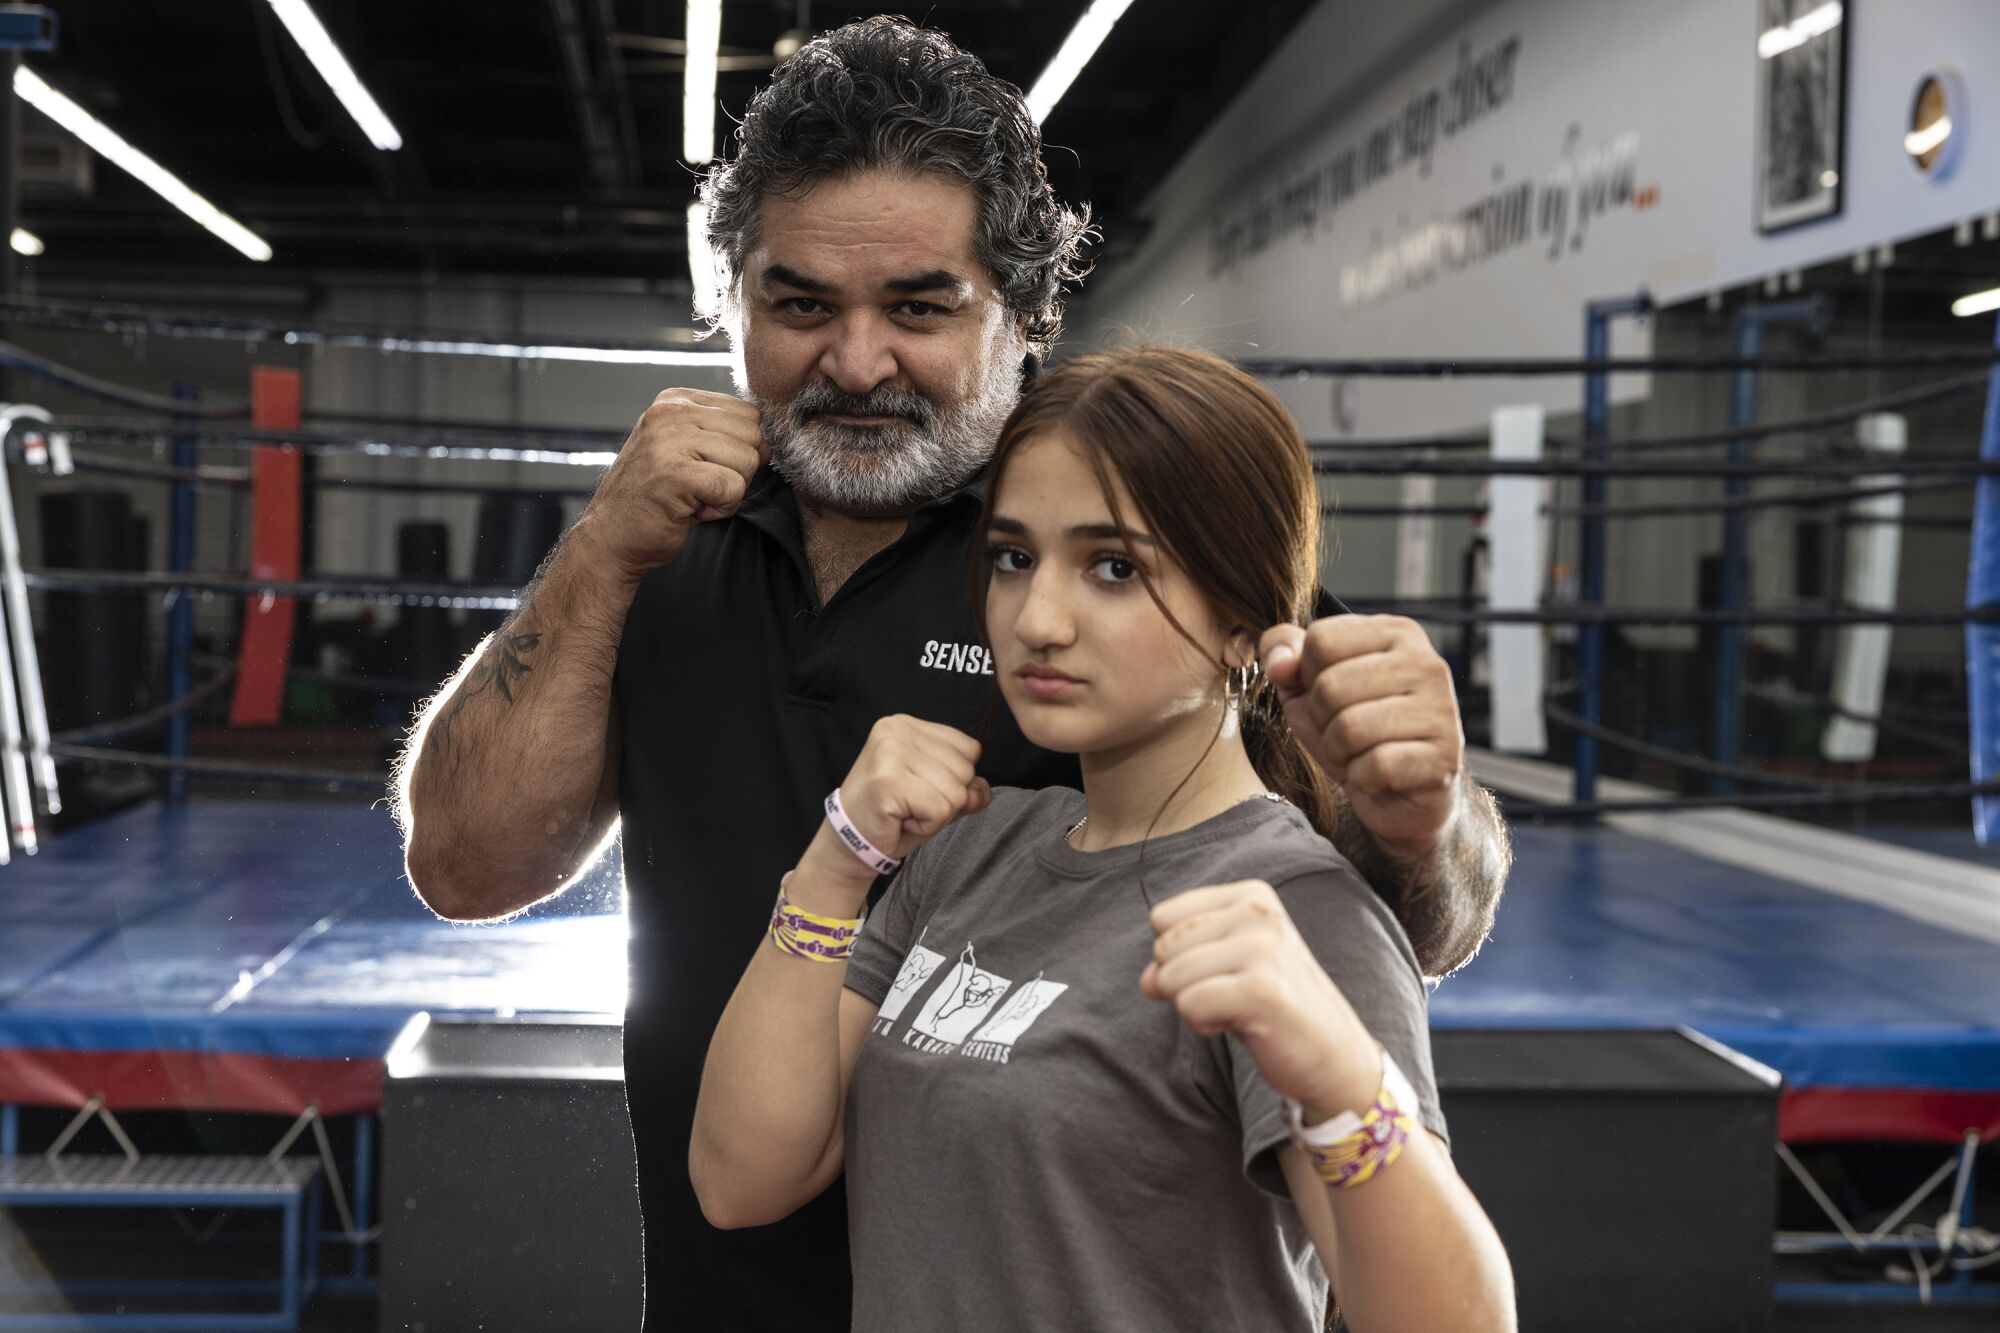 Fariborz Azhakh and his daughter, Laila pose with their fists up.